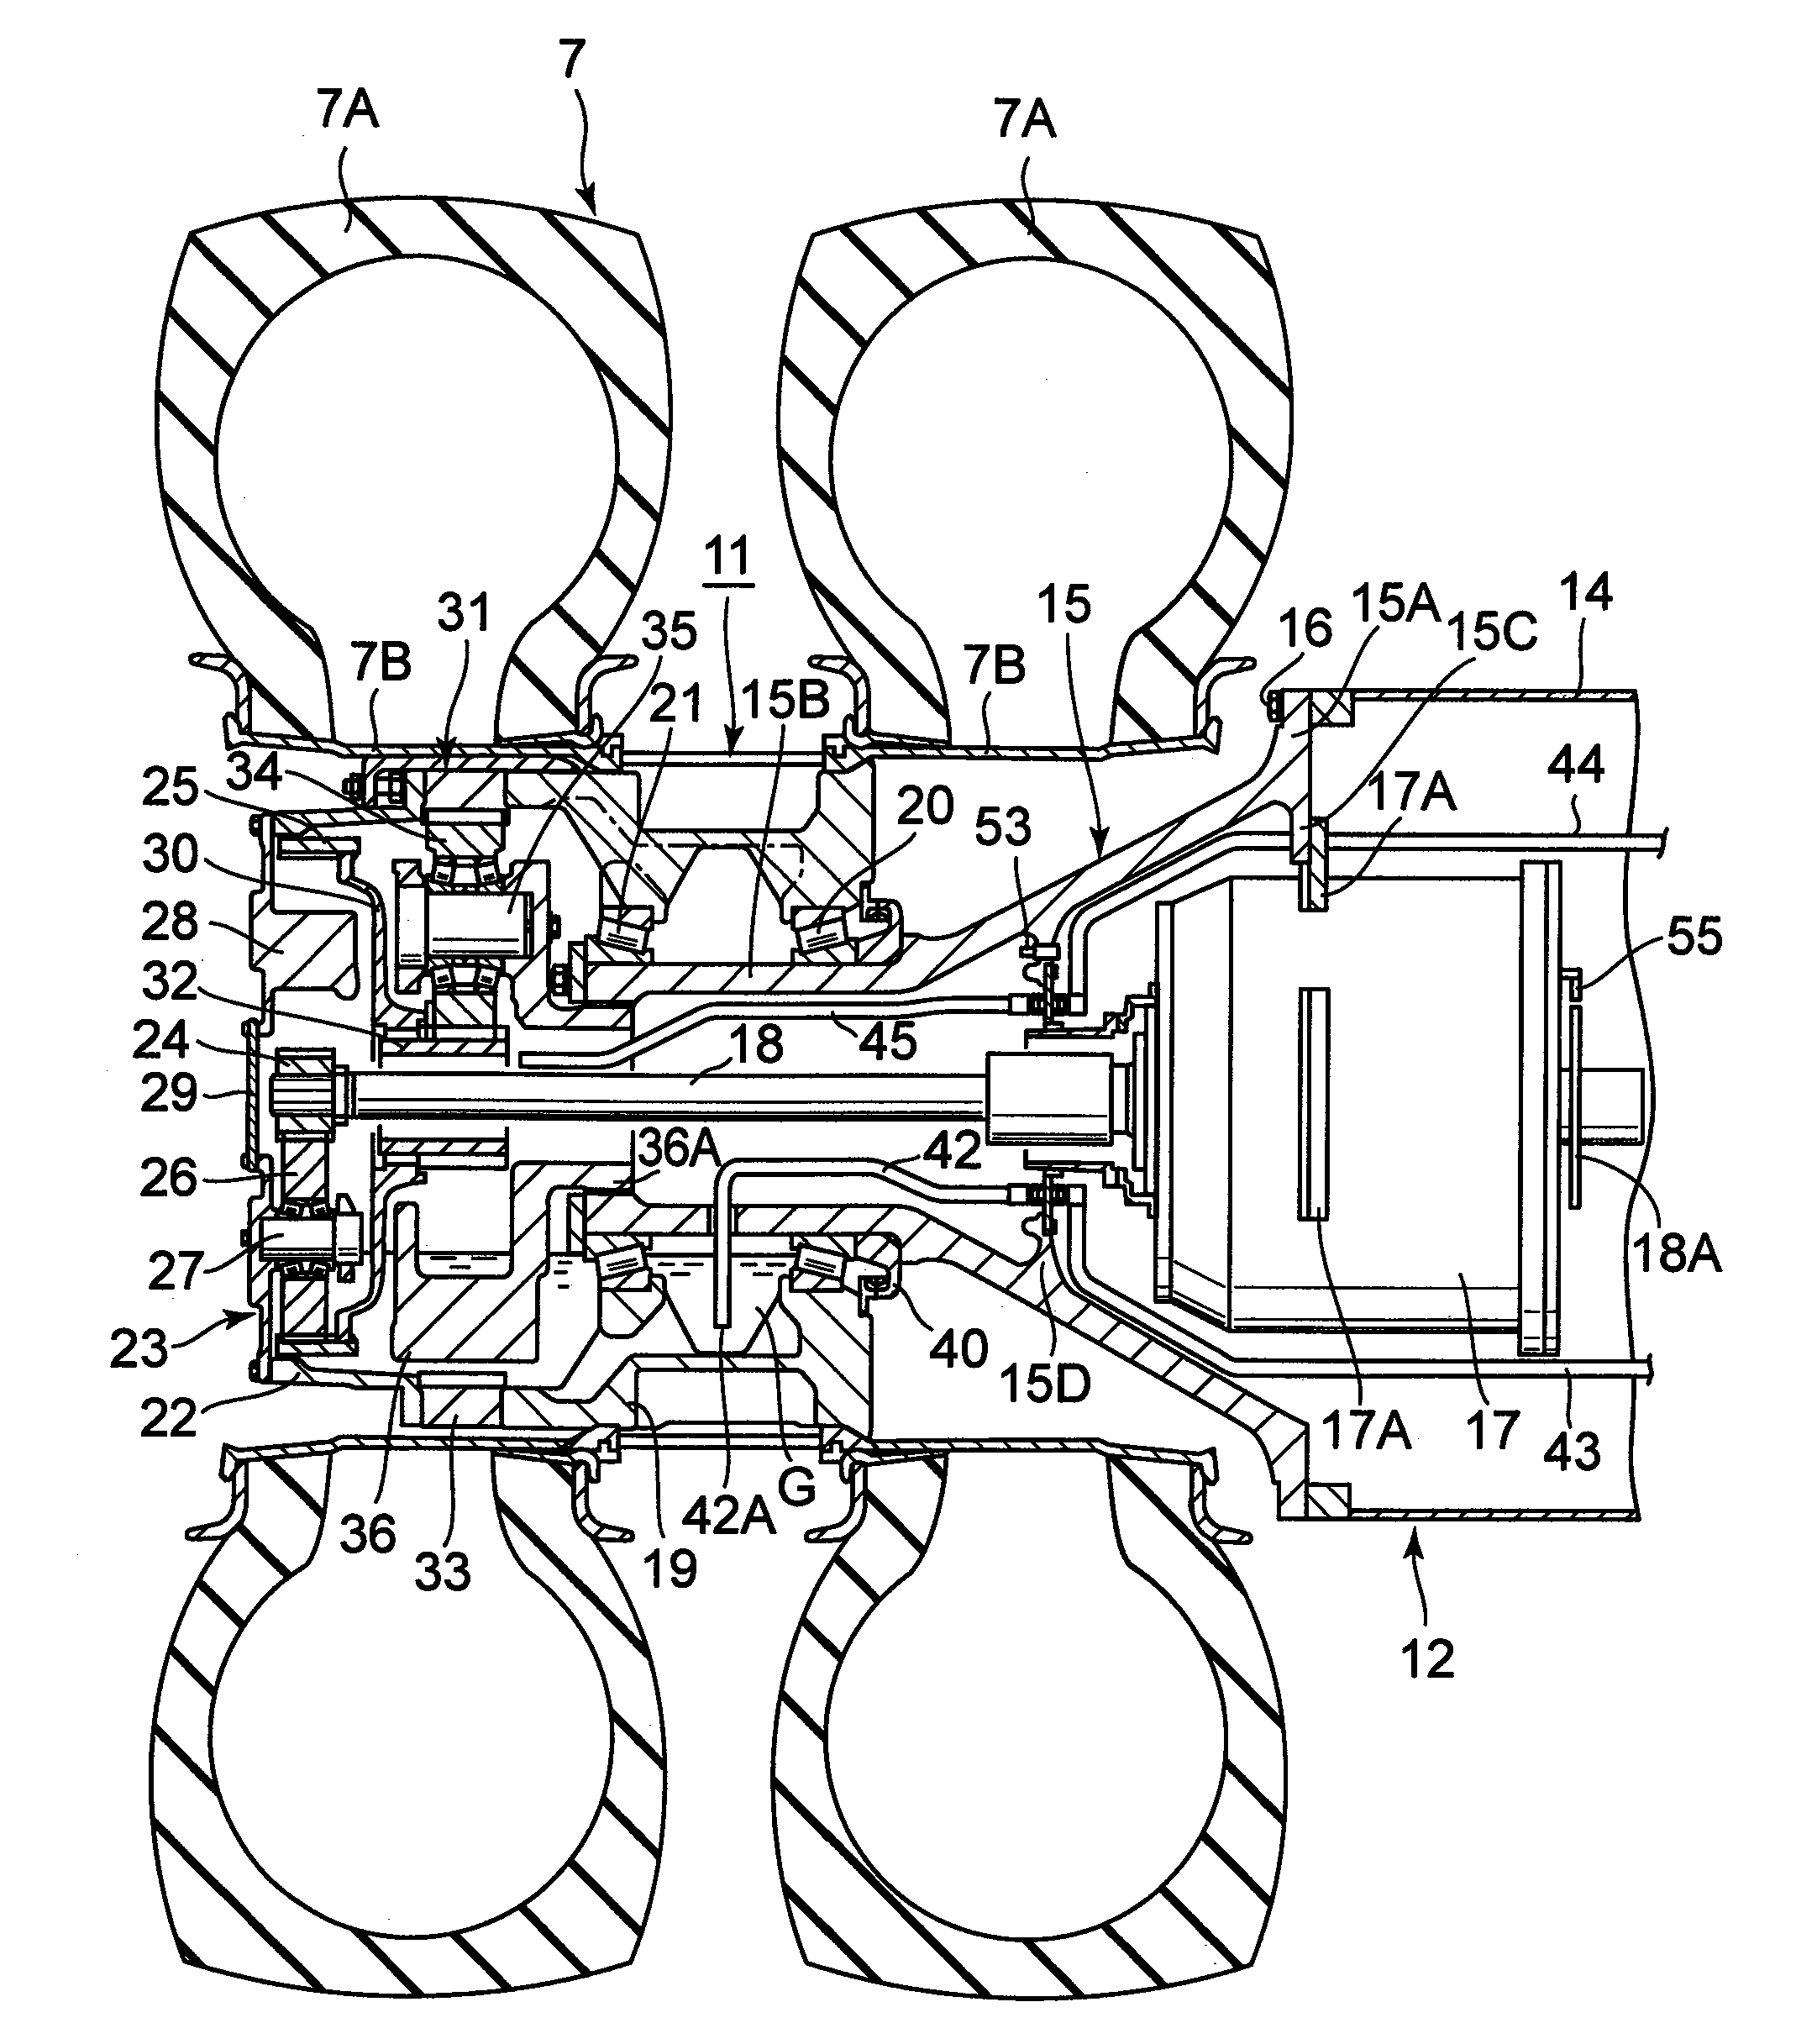 Traveling drive unit for working vehicle